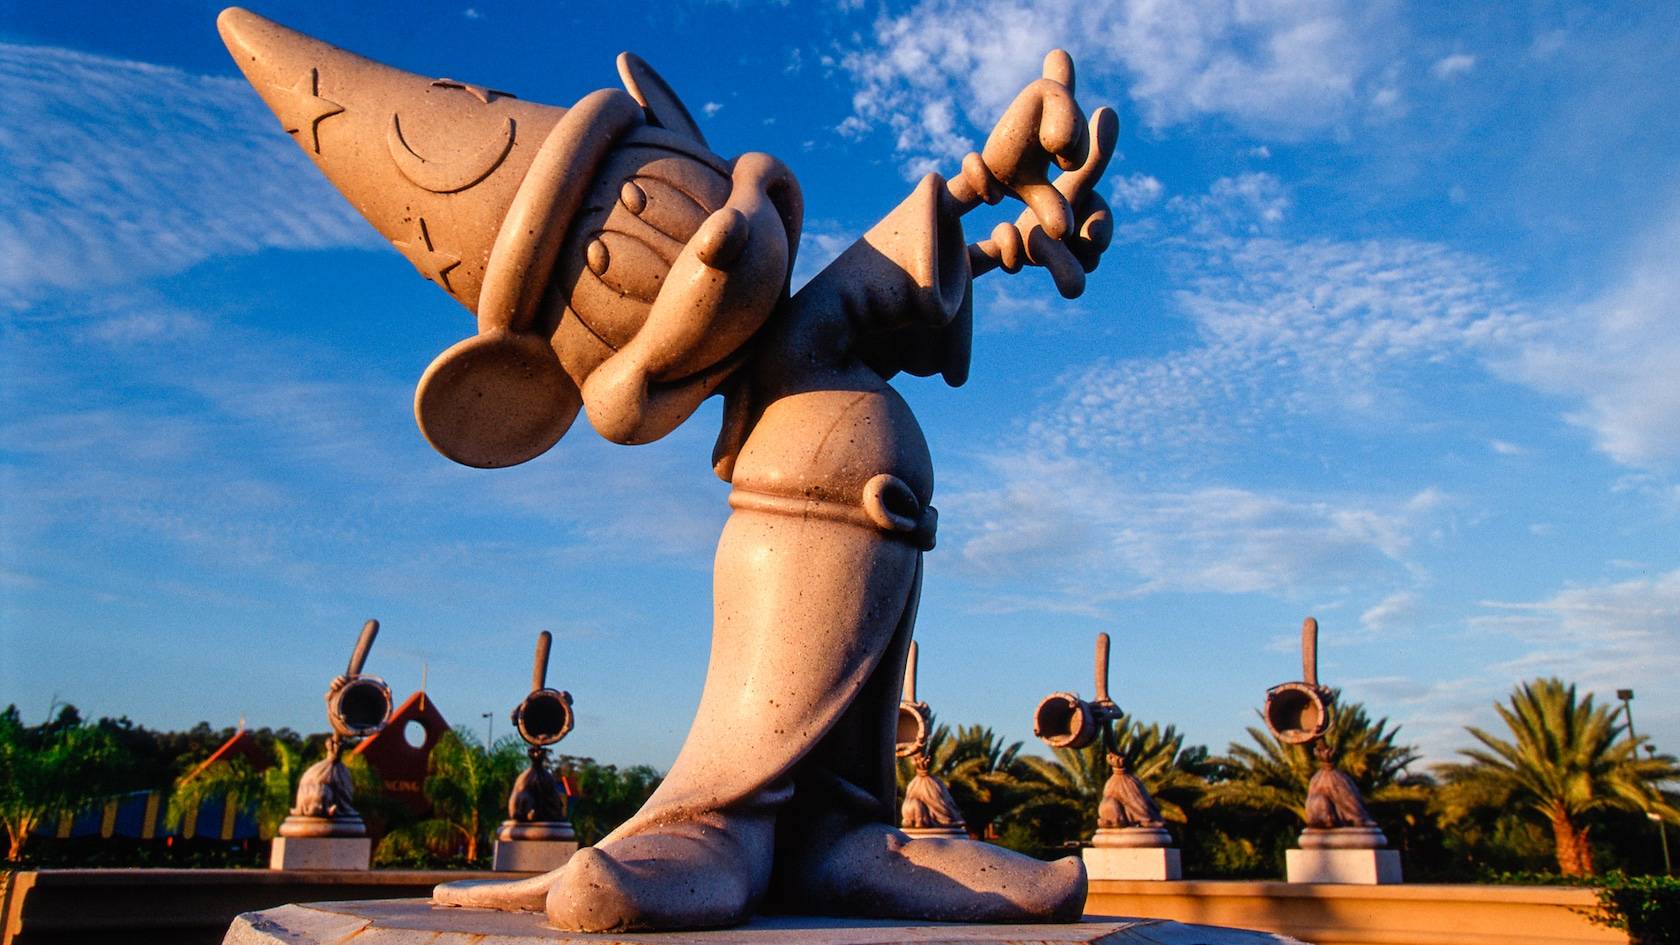 The Gardens Course at Fantasia Miniature Golf closing for refurbishment during May 2022